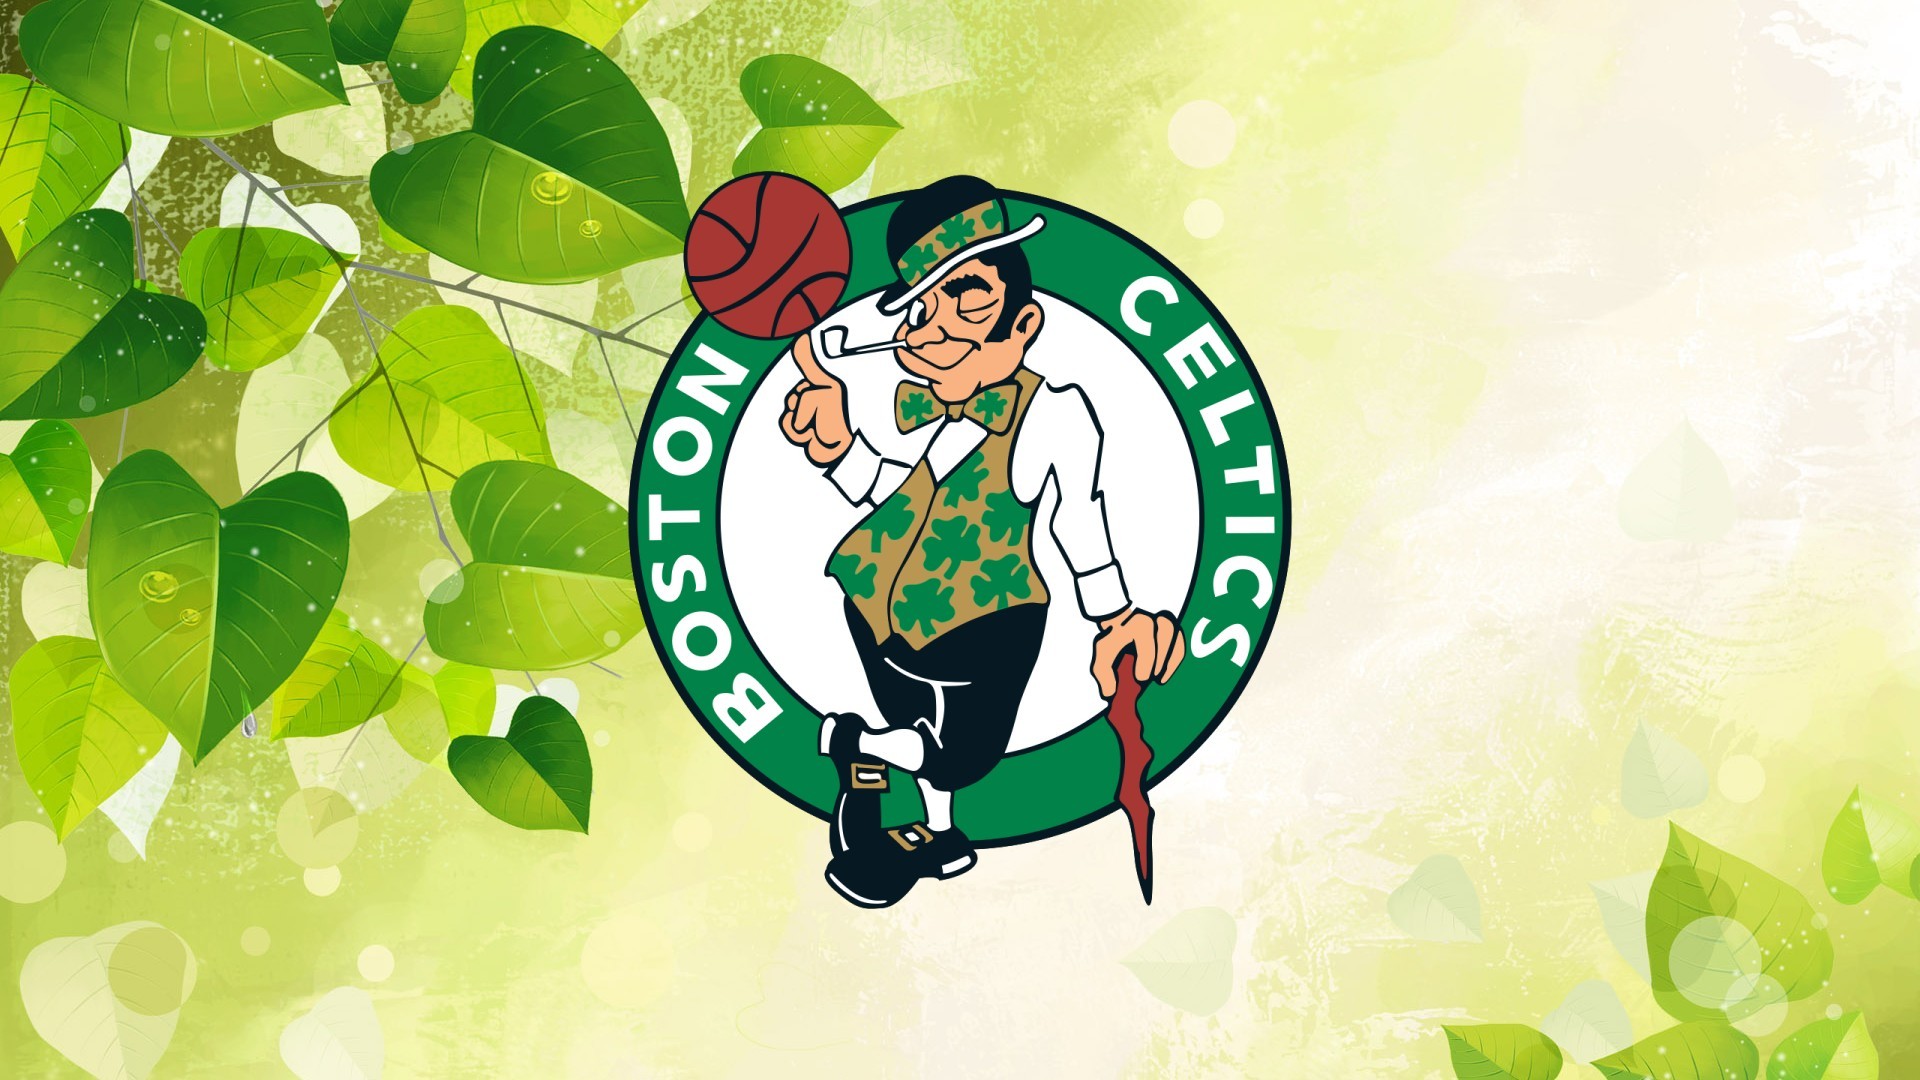 1920x1080 Boston Celtics Logo For PC Wallpaper with image dimensions  pixel.  You can make this